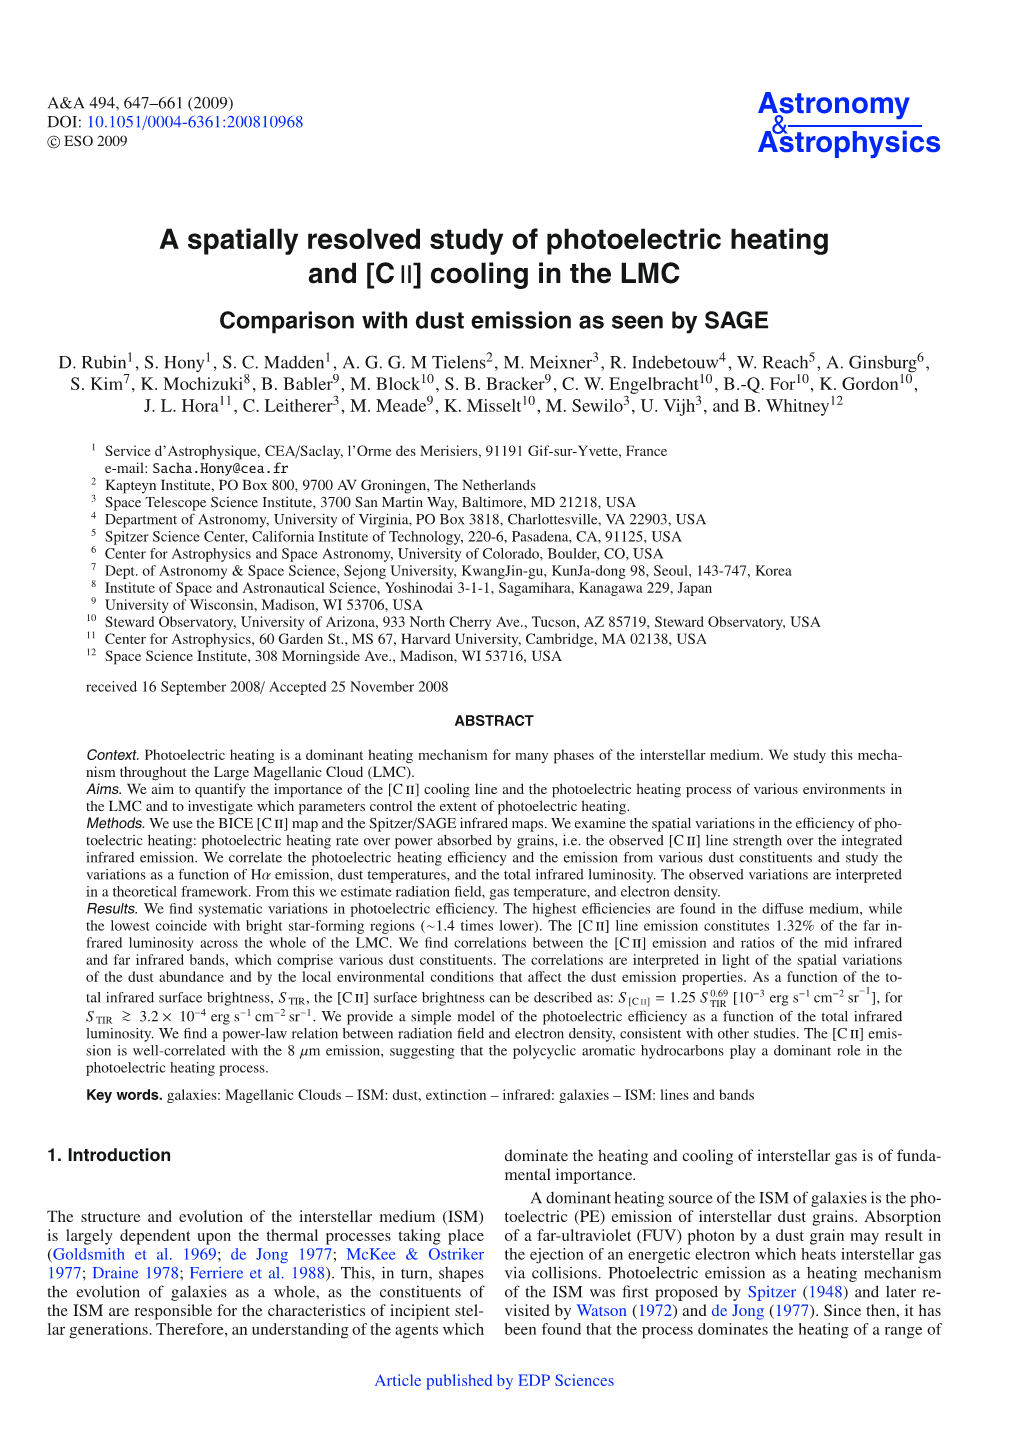 A Spatially Resolved Study of Photoelectric Heating and [C Ii] Cooling in the LMC Comparison with Dust Emission As Seen by SAGE